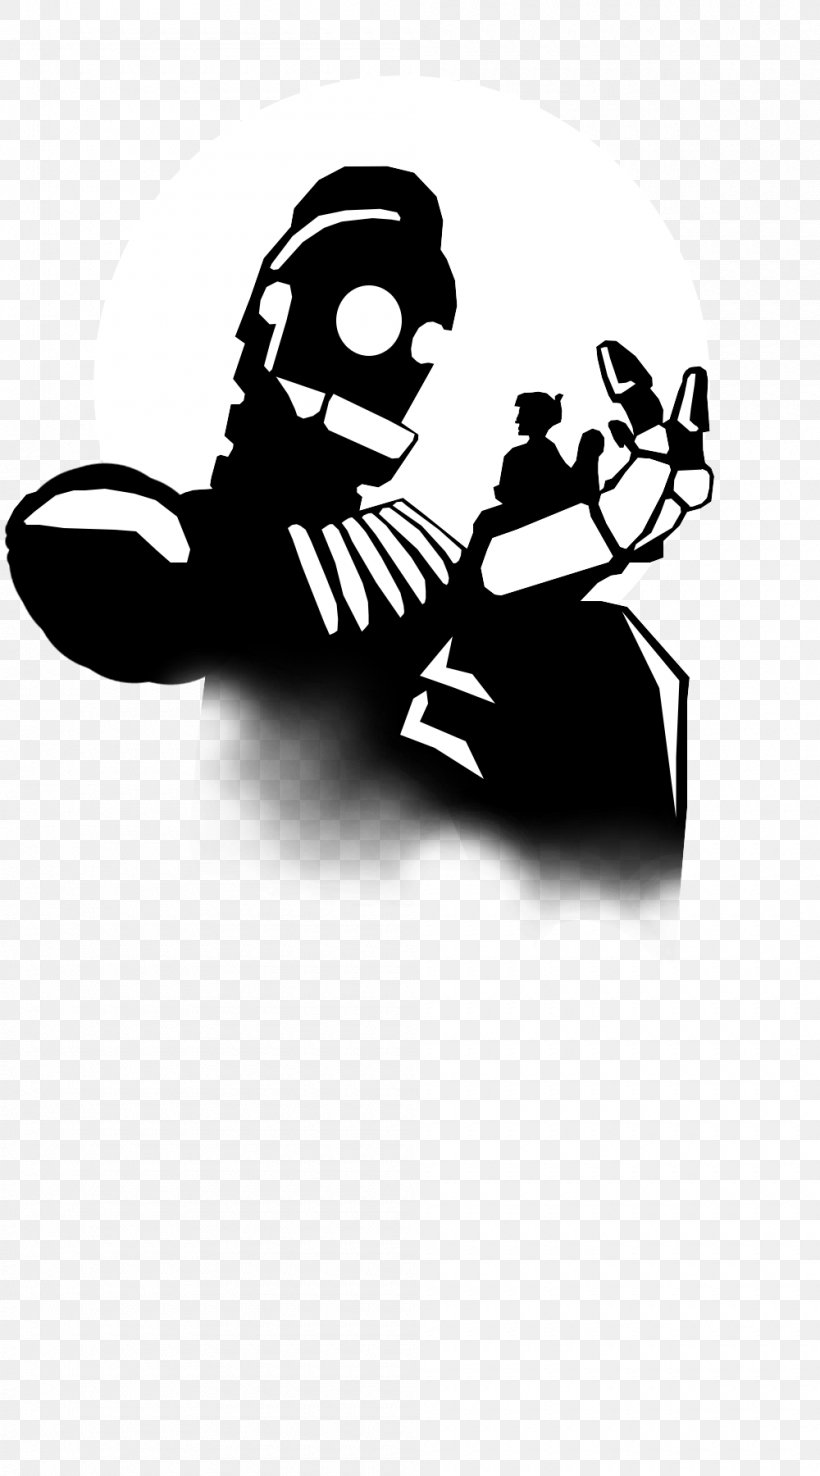 Stencil Silhouette Drawing, PNG, 1000x1800px, Stencil, Art, Black, Black And White, Craft Download Free